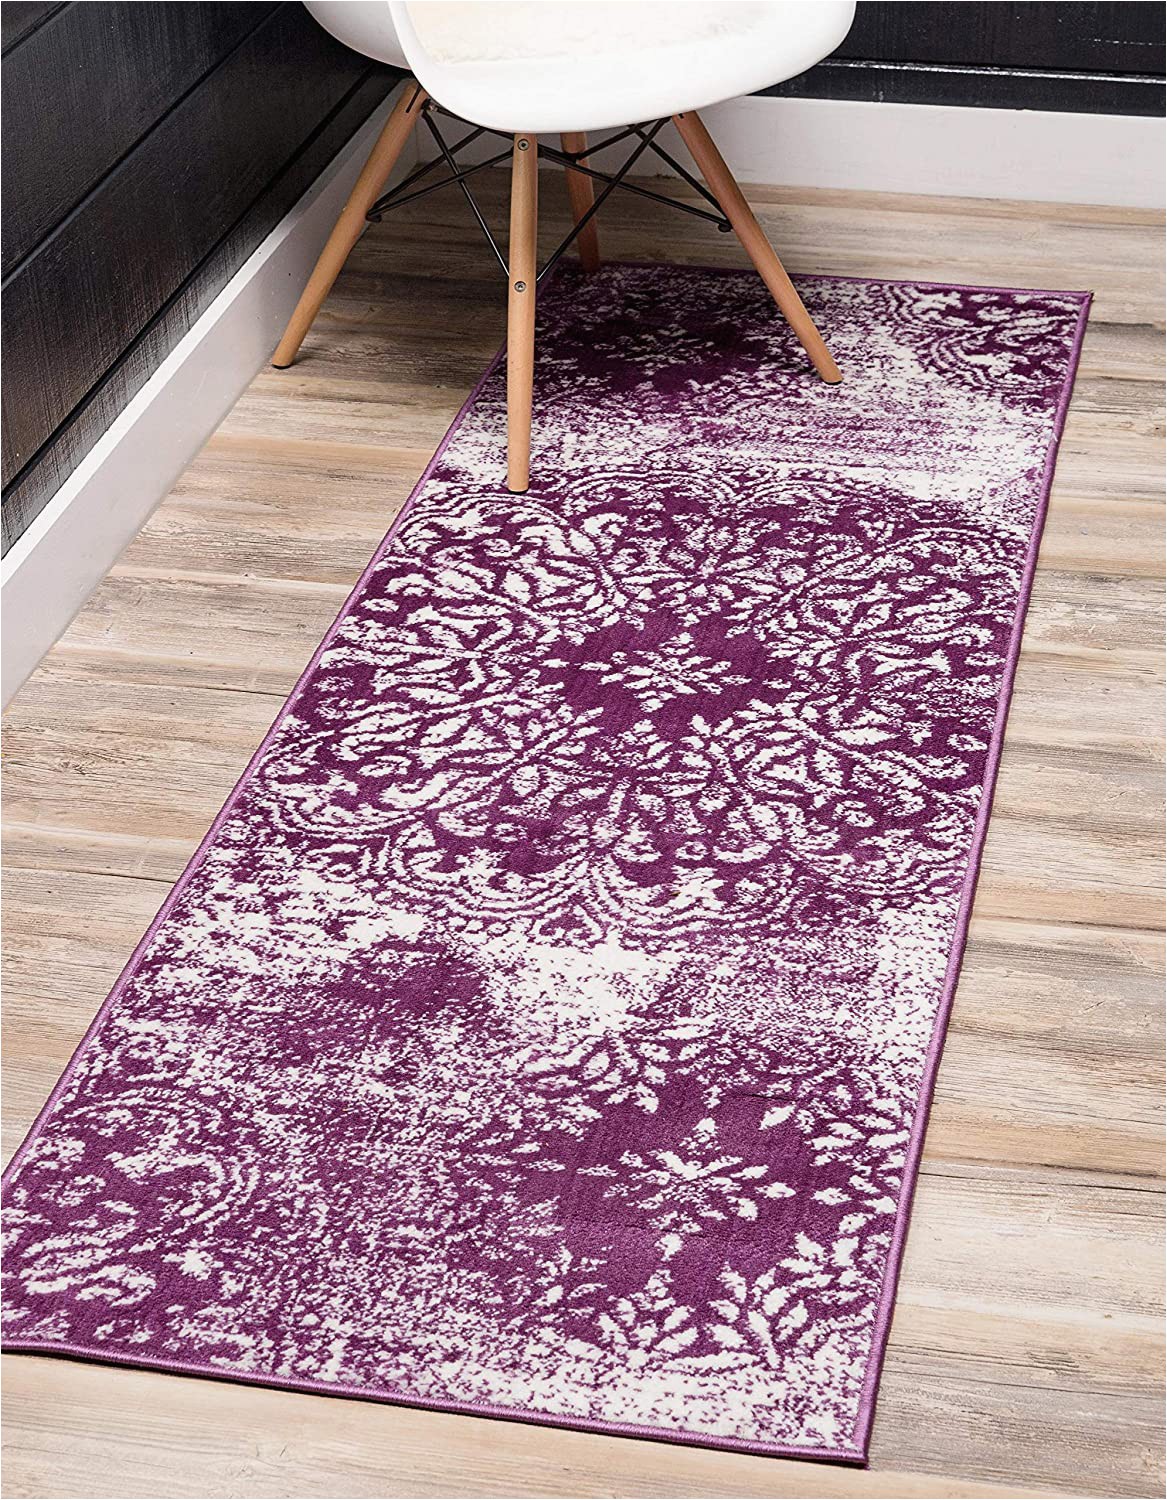 Purple and Beige area Rug Unique Loom sofia Collection Traditional Vintage Beige area Rug 2 0 X 13 0 Runner Purple